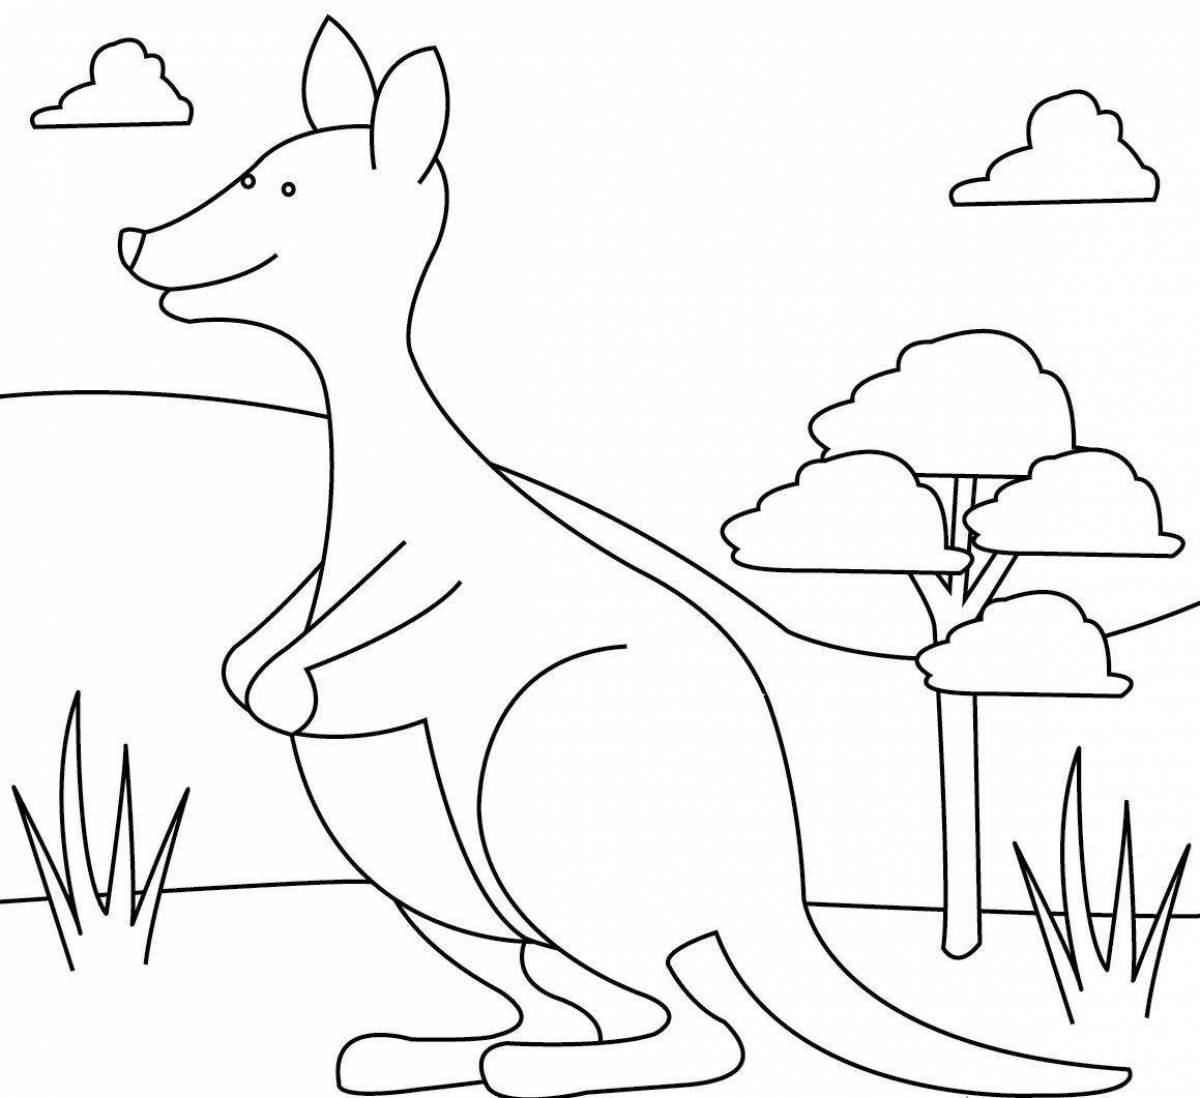 Tempting mainland australia coloring page